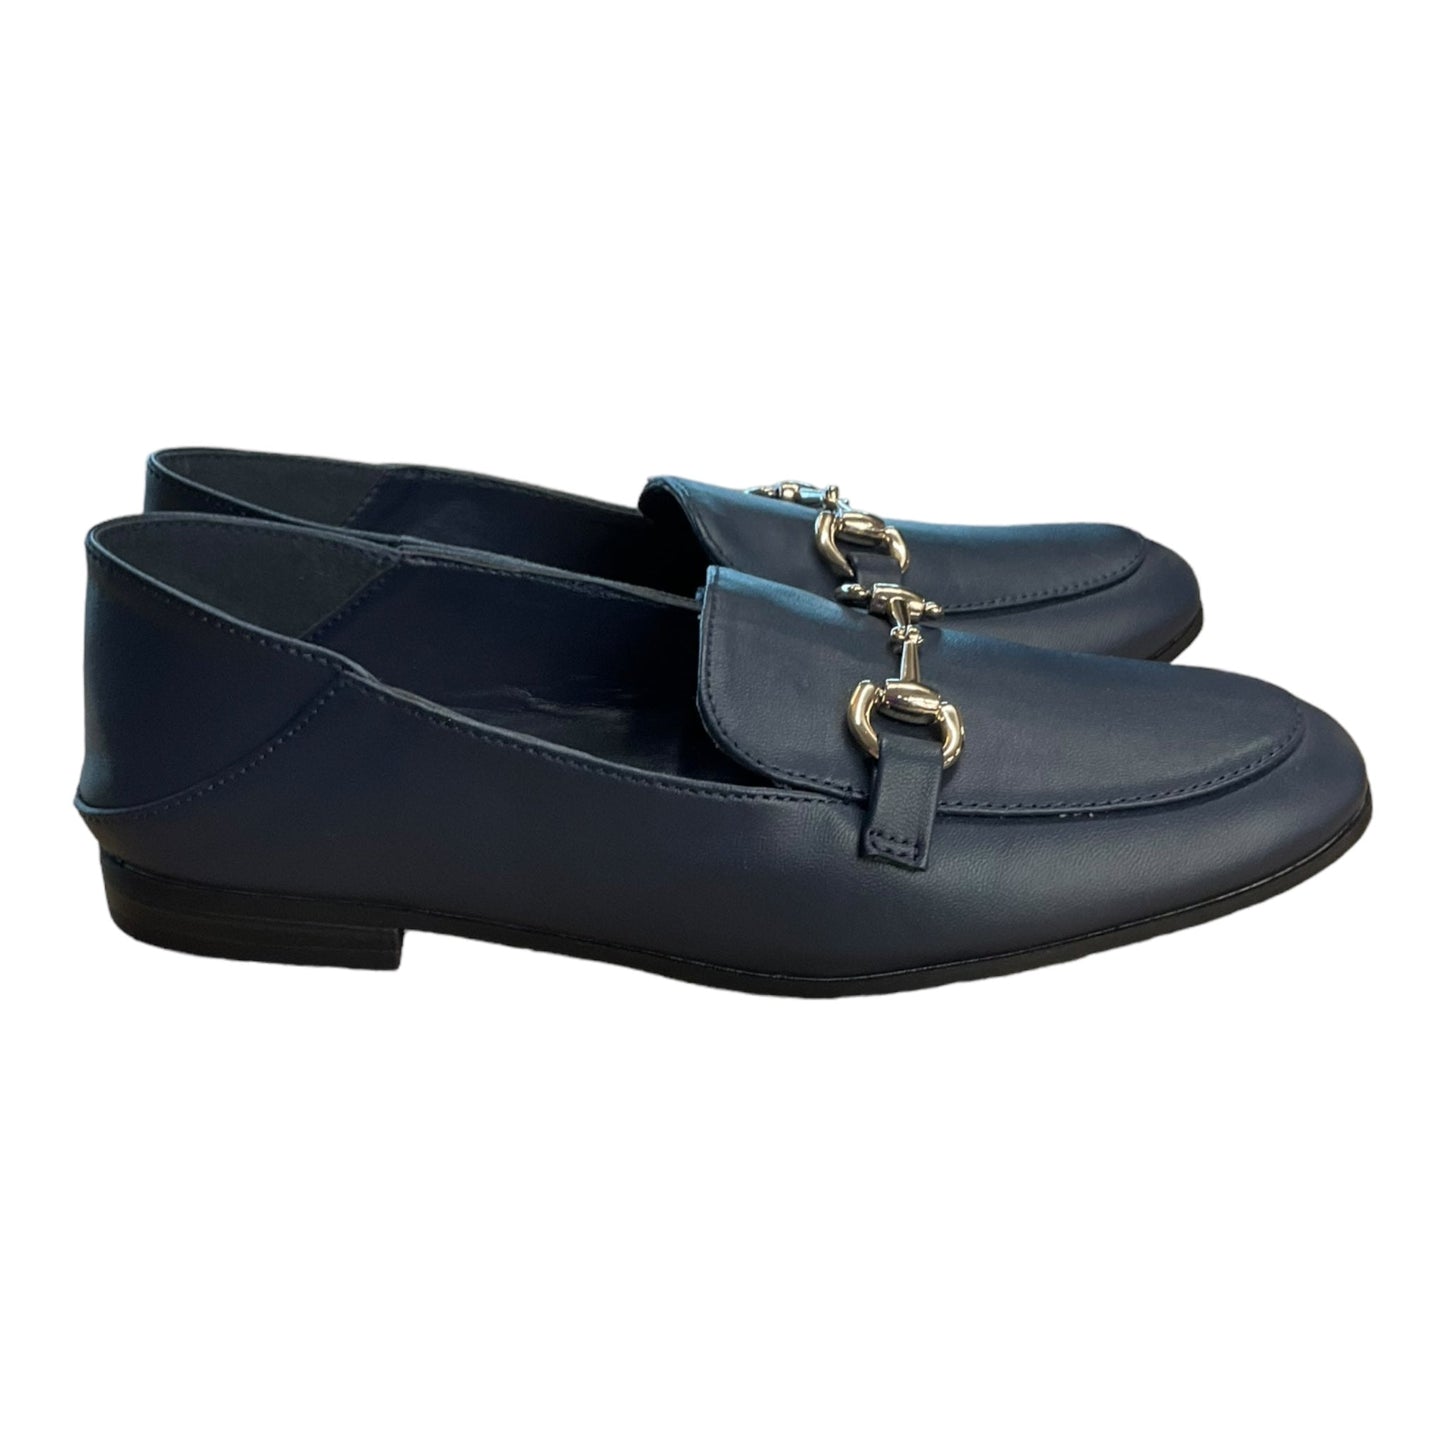 Shoes Flats Loafer Oxford By Bcbgeneration  Size: 6.5